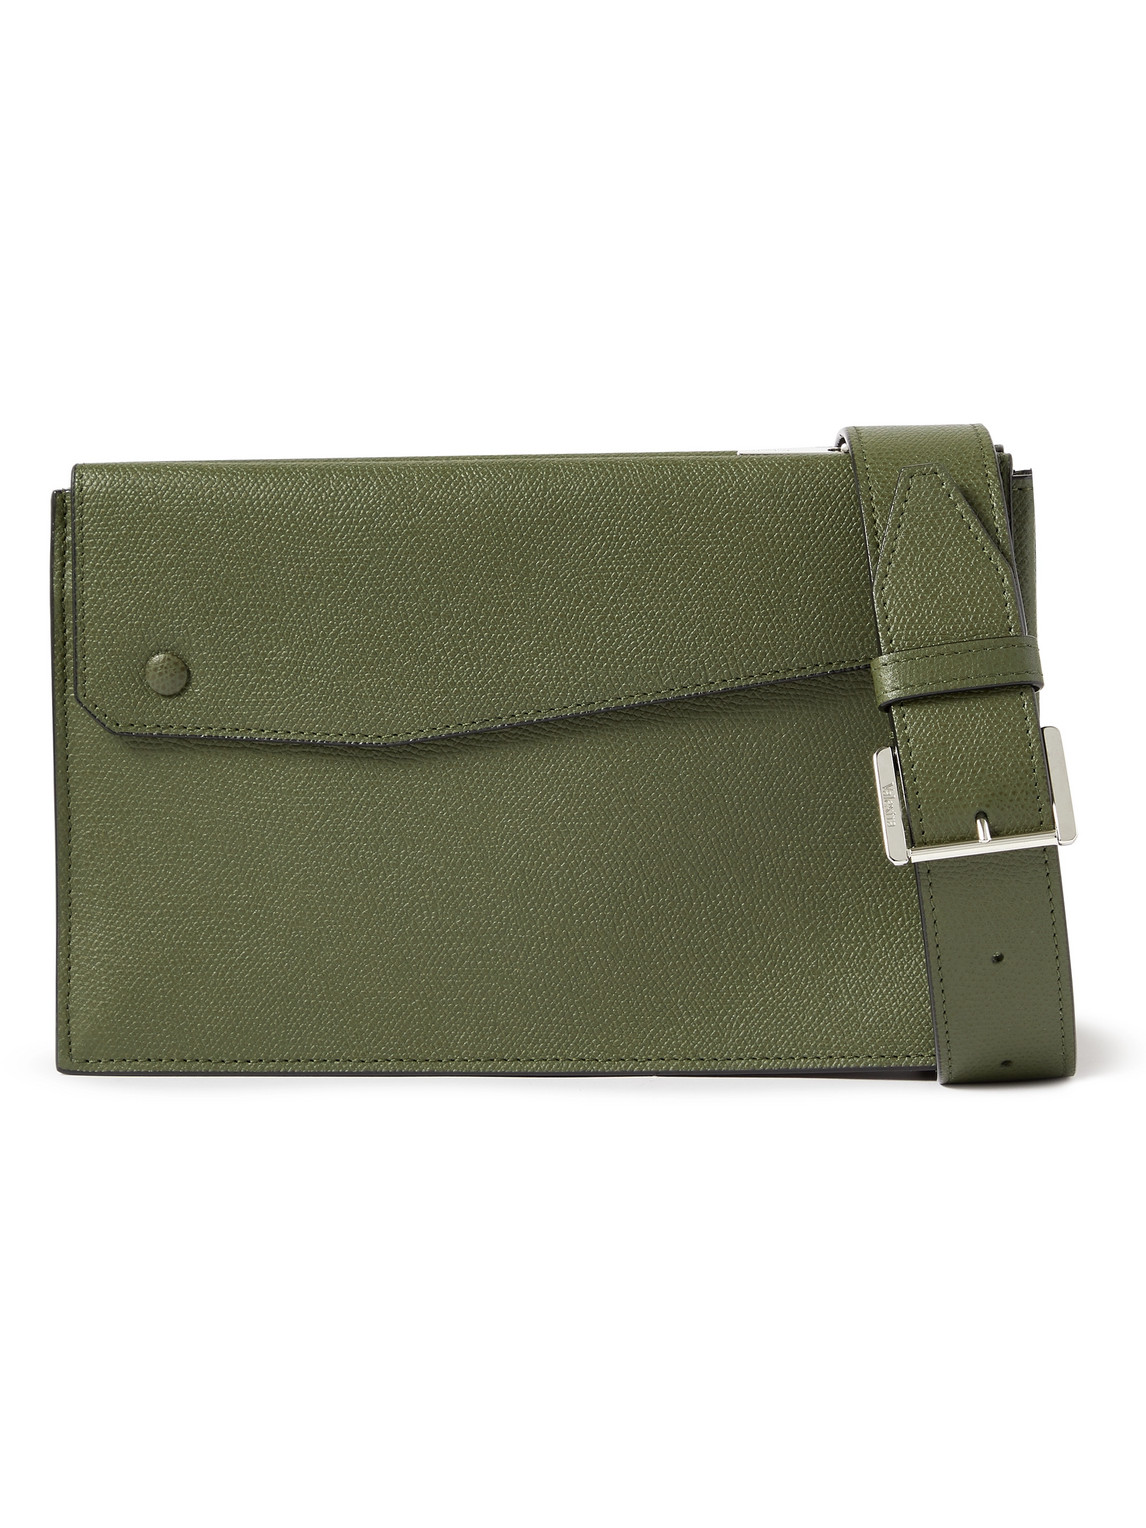 Valextra Leather Messenger Bag In Green